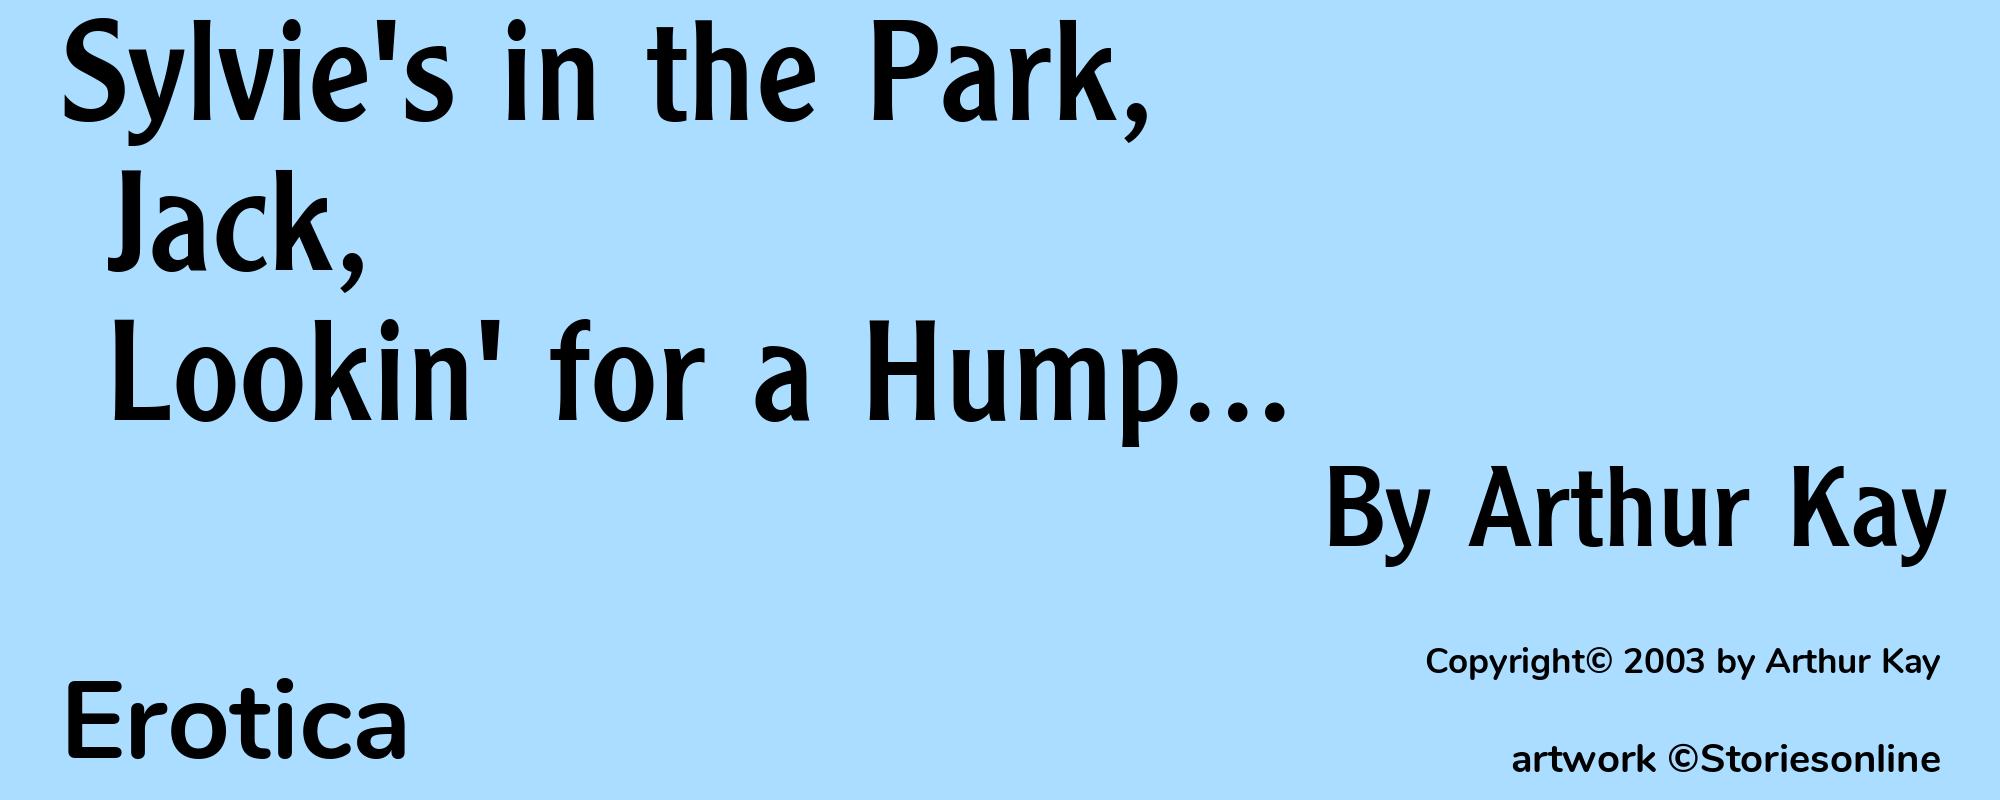 Sylvie's in the Park, Jack, Lookin' for a Hump... - Cover